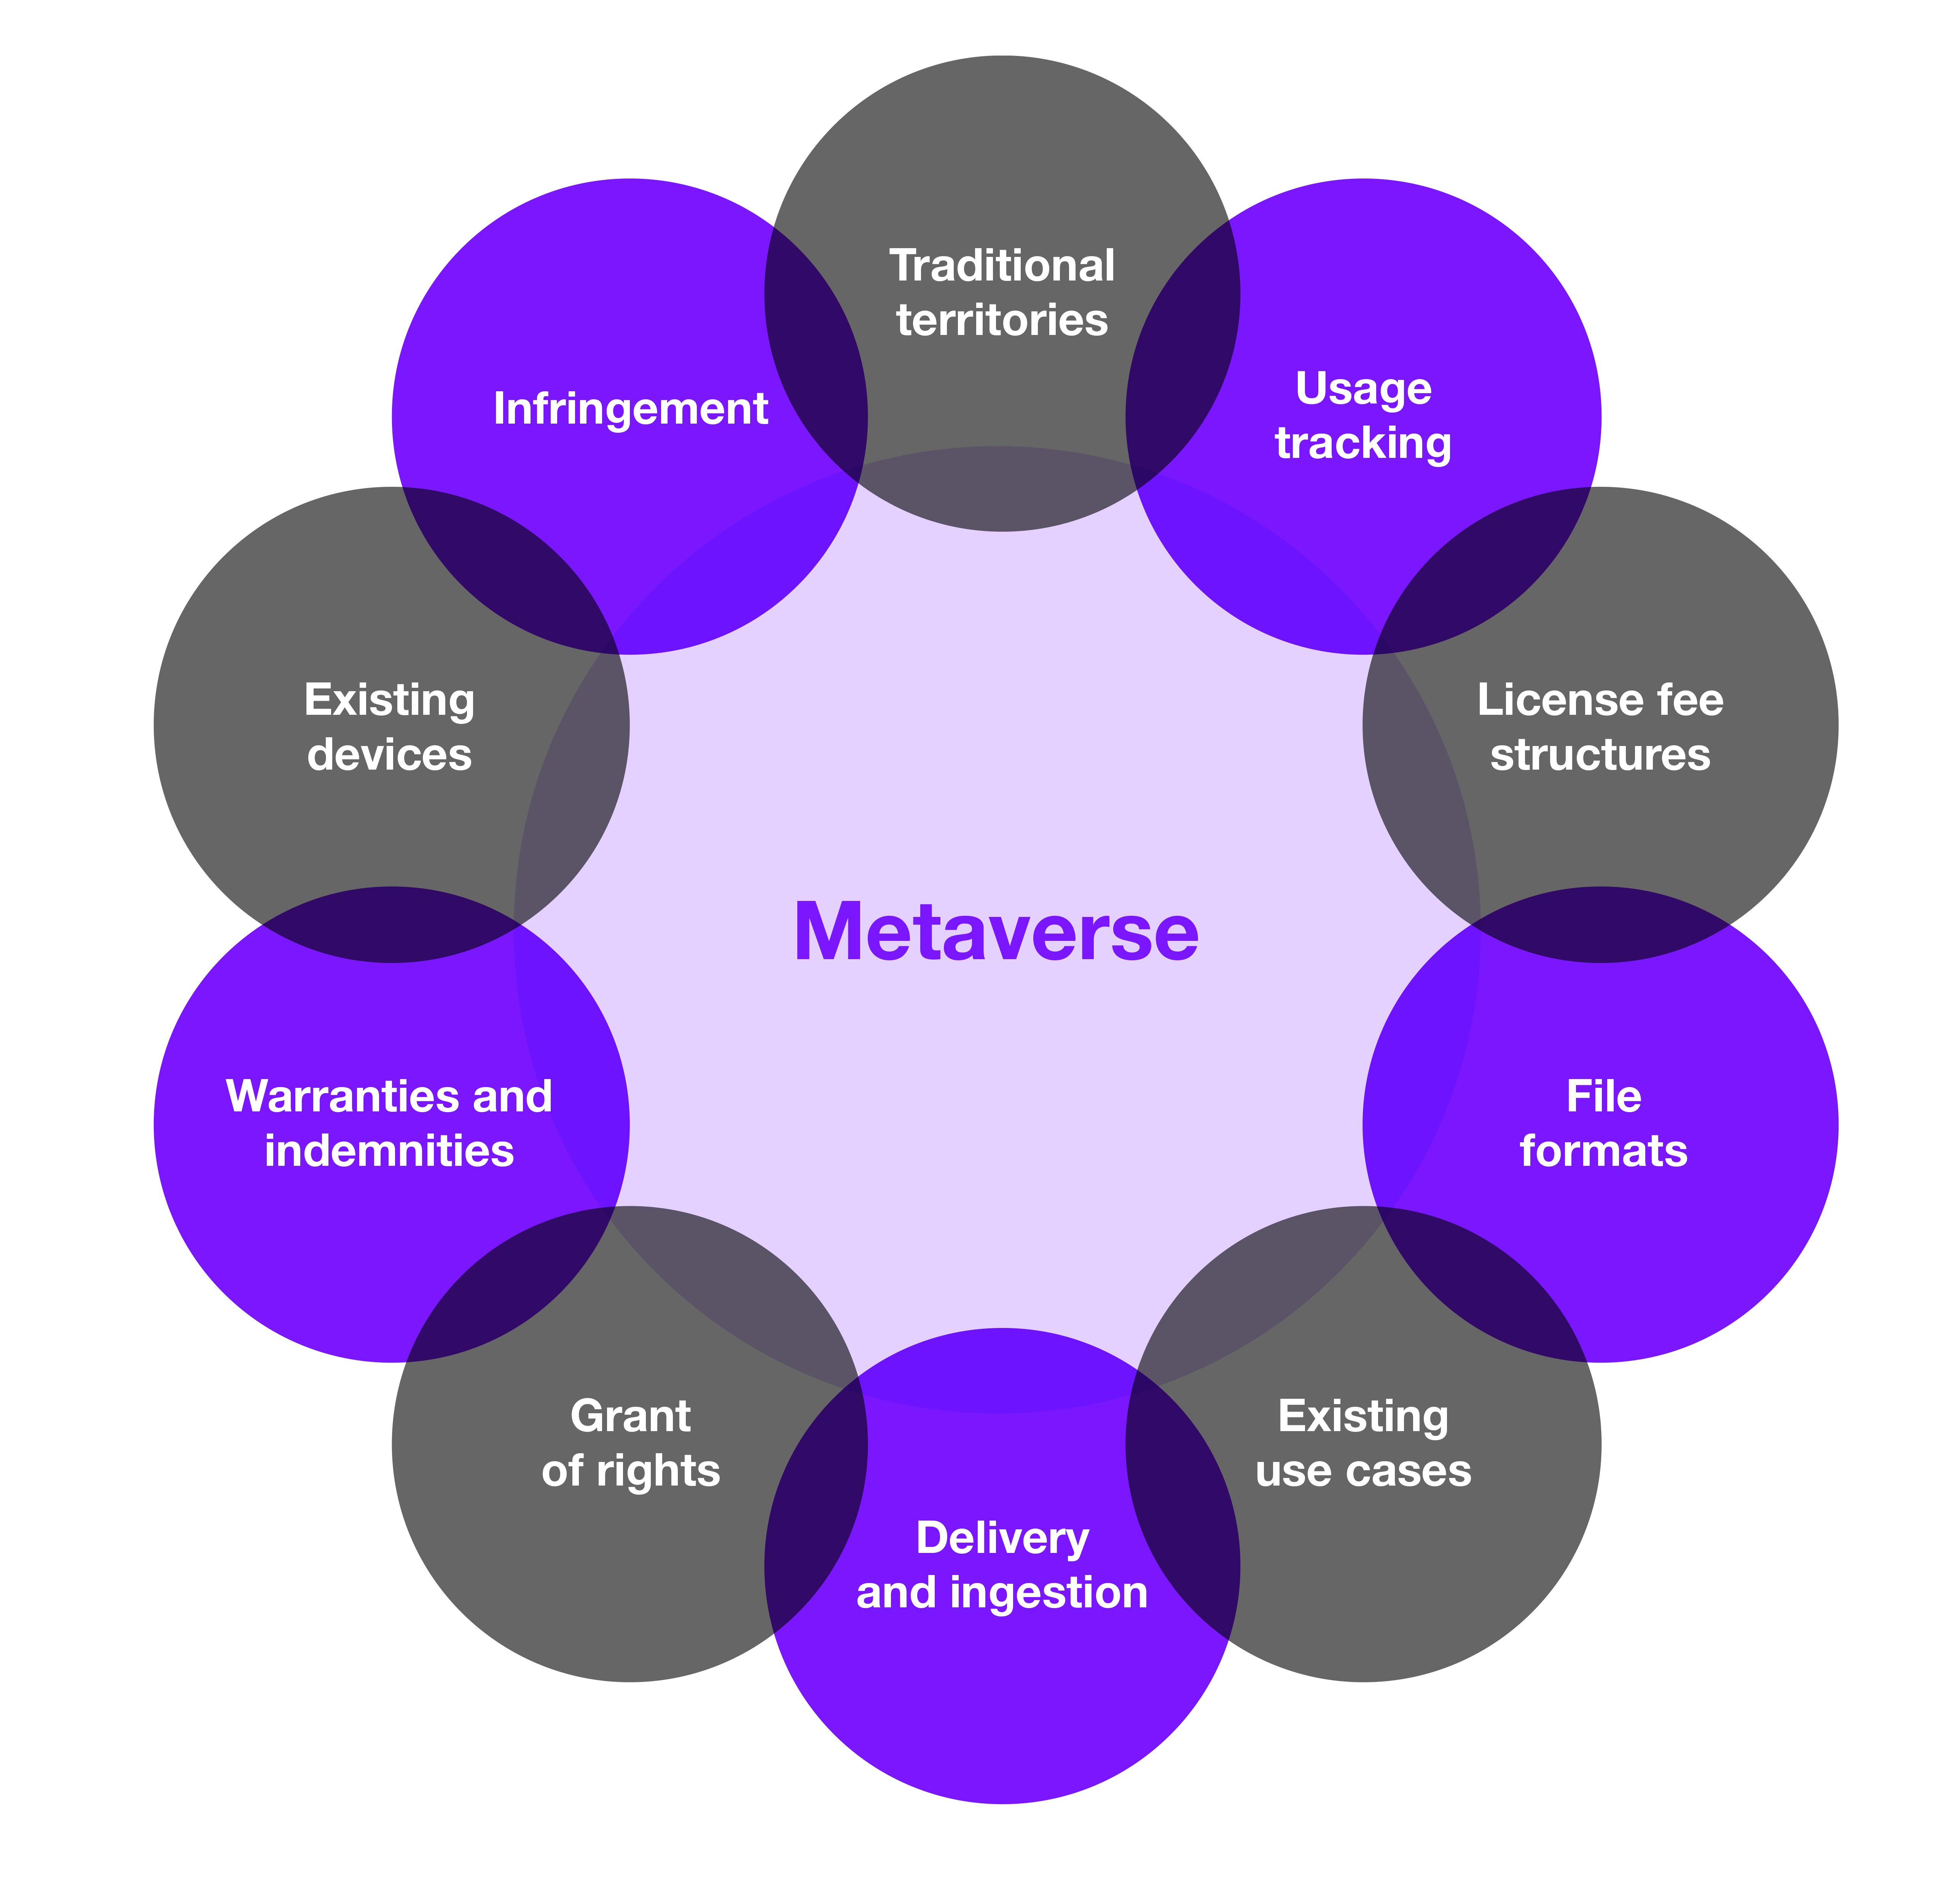 Content licensing in the metaverse